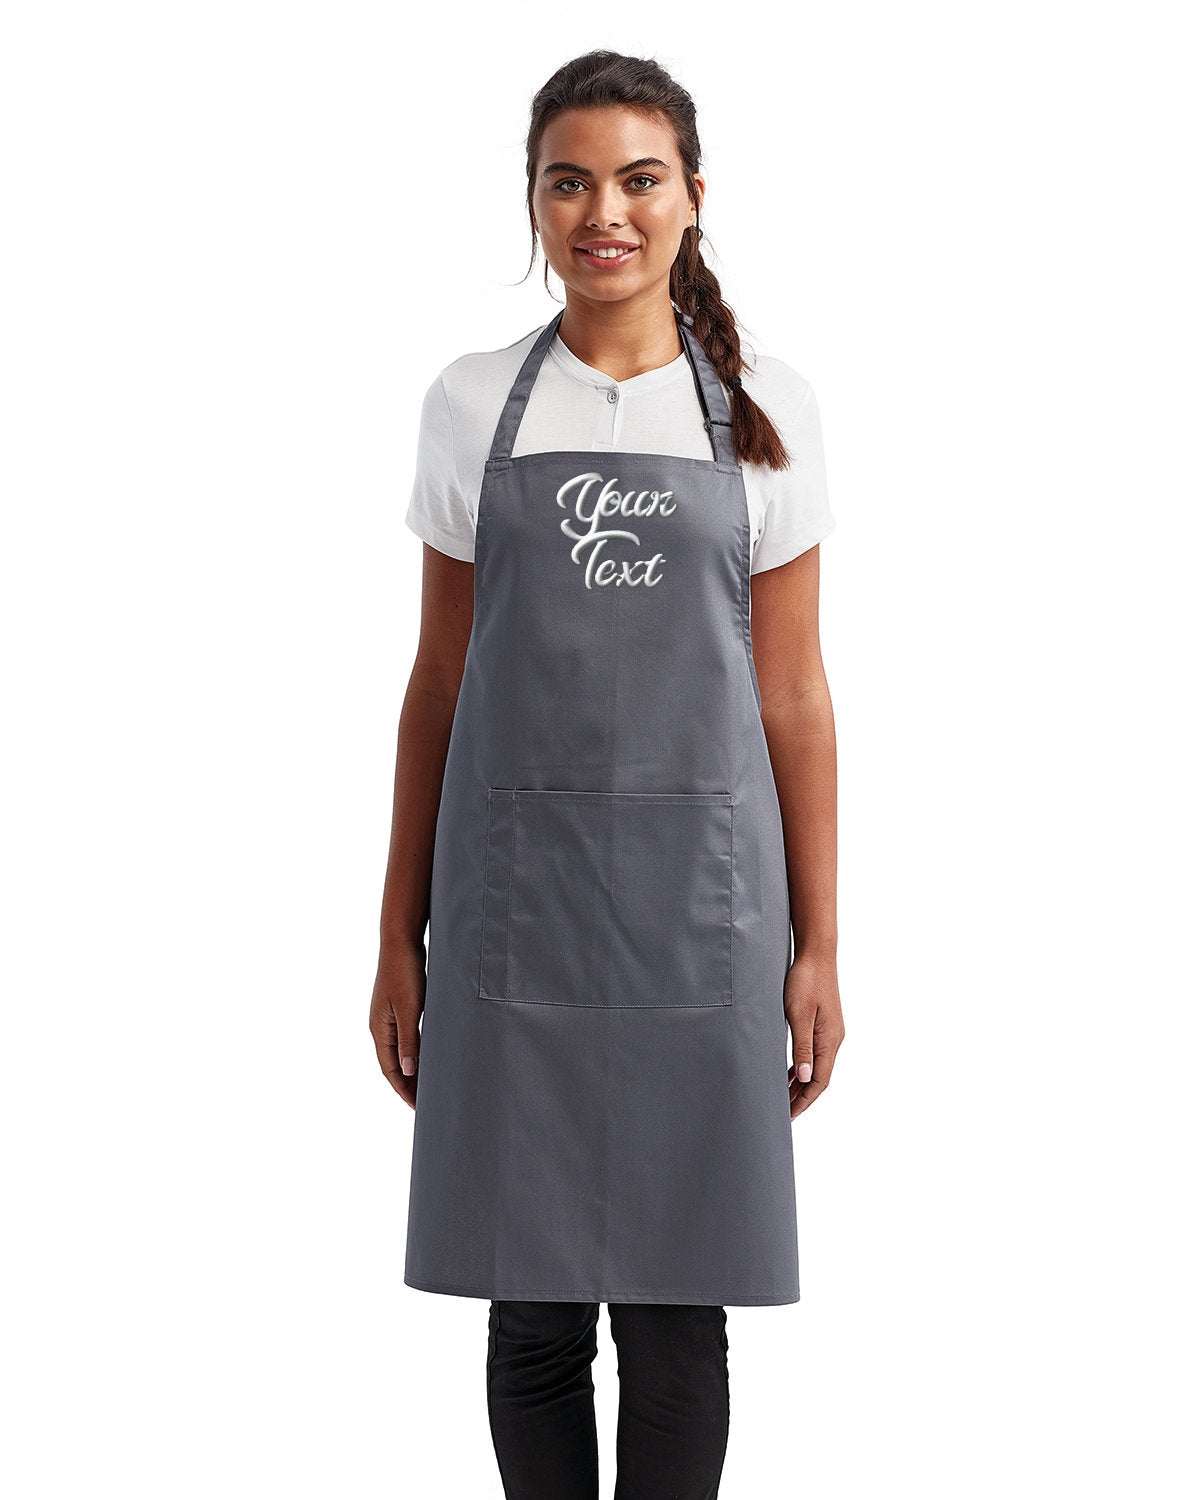 Restaurant Aprons with Your Company Name Embroidered - 3 Pack dark grey